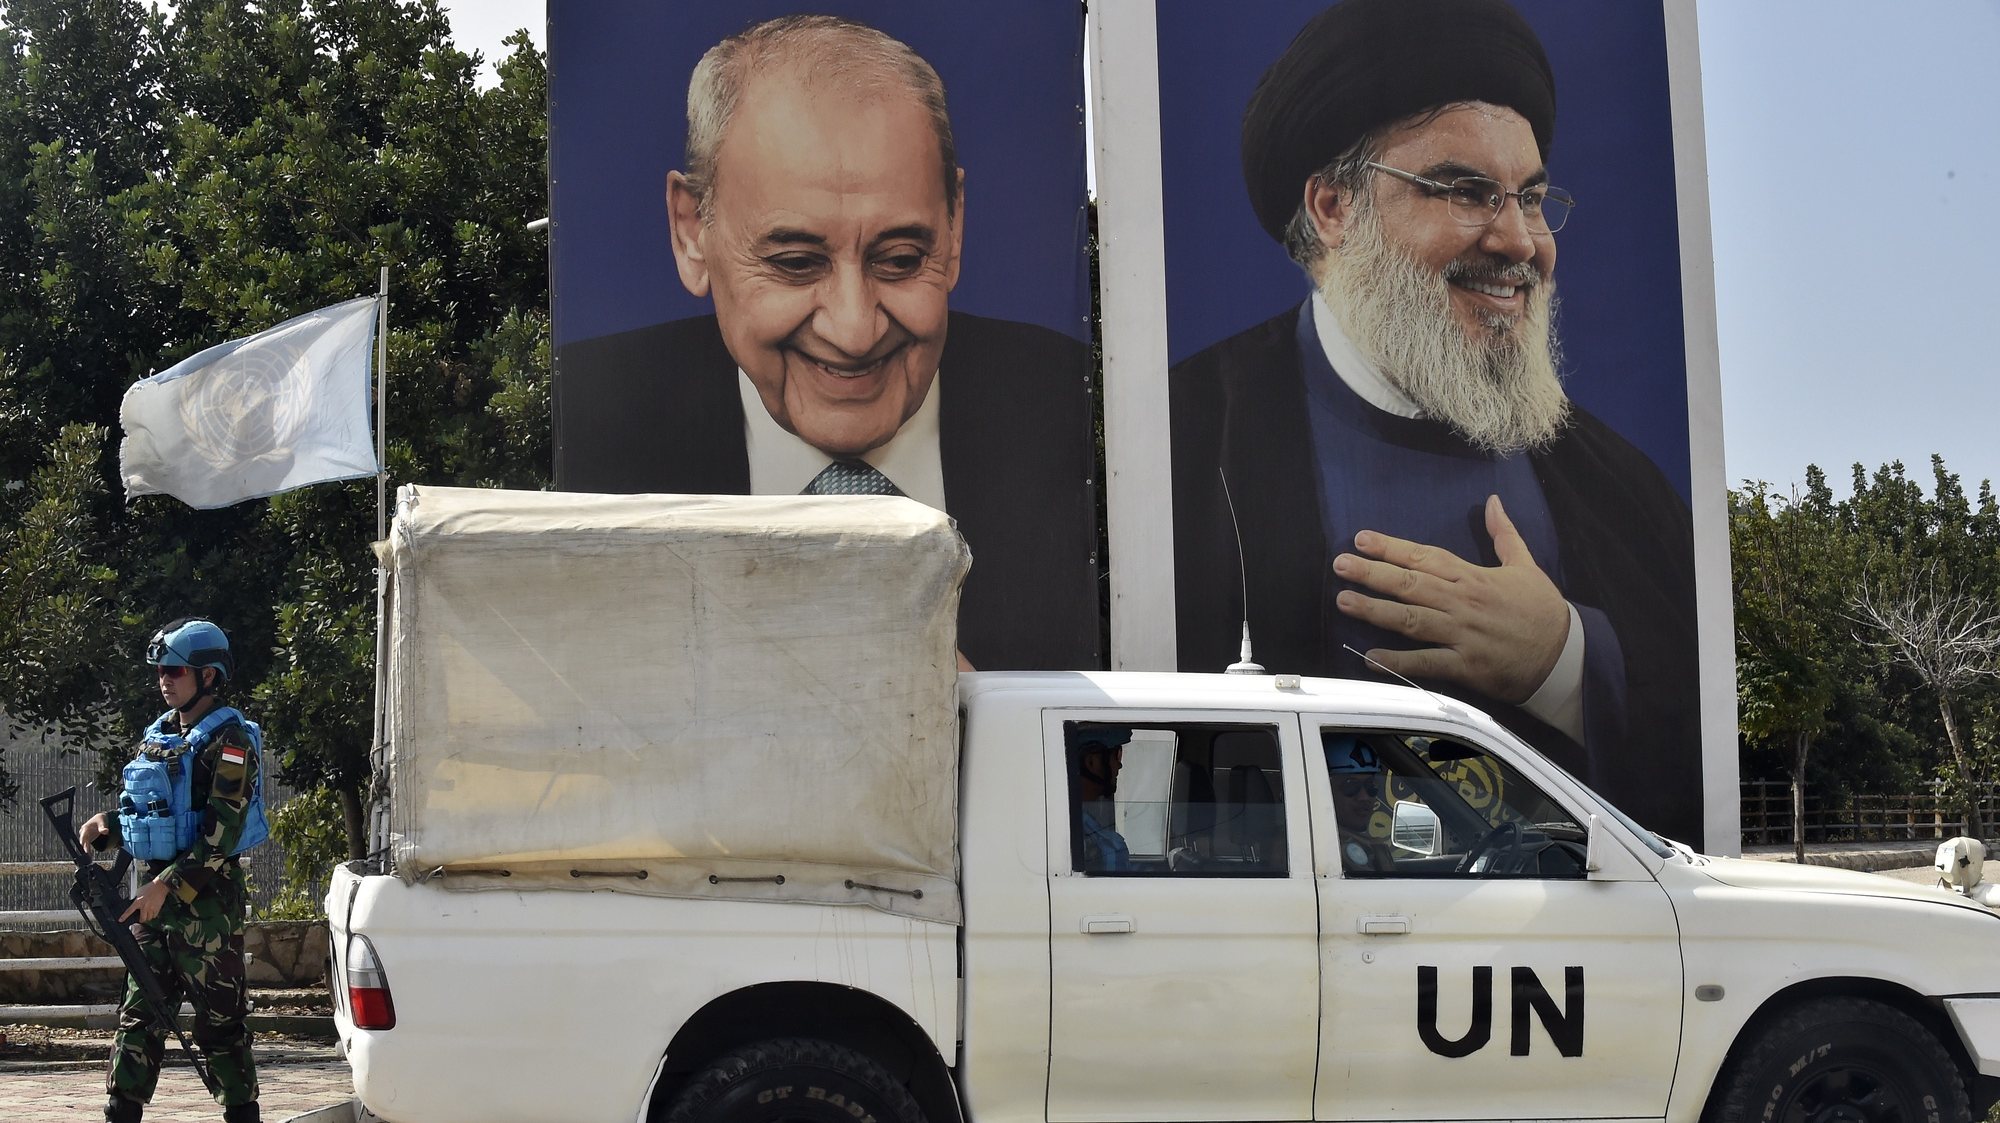 epa10909499 Soldiers of the UN peacekeeping mission, United Nations Interim Force In Lebanon (UNIFIL), stand guard next to posters of Lebanese Parliament Speaker Nabih Berri (L) and Hezbollah leader Hassan Nasrallah (R), in the village of Aadaysit, southern Lebanon, 09 October 2023. More than 700 Israelis were killed and over 2,000 were injured since the Islamist movement Hamas carried out an unprecedented attack on southern Israel on 07 October, the Israeli army said. According to Palestinian officials, more than 500 people were killed and nearly 3,000 were injured as a result of Israel’s retaliatory raids and air strikes in the Palestinian enclave.  EPA/WAEL HAMZEH